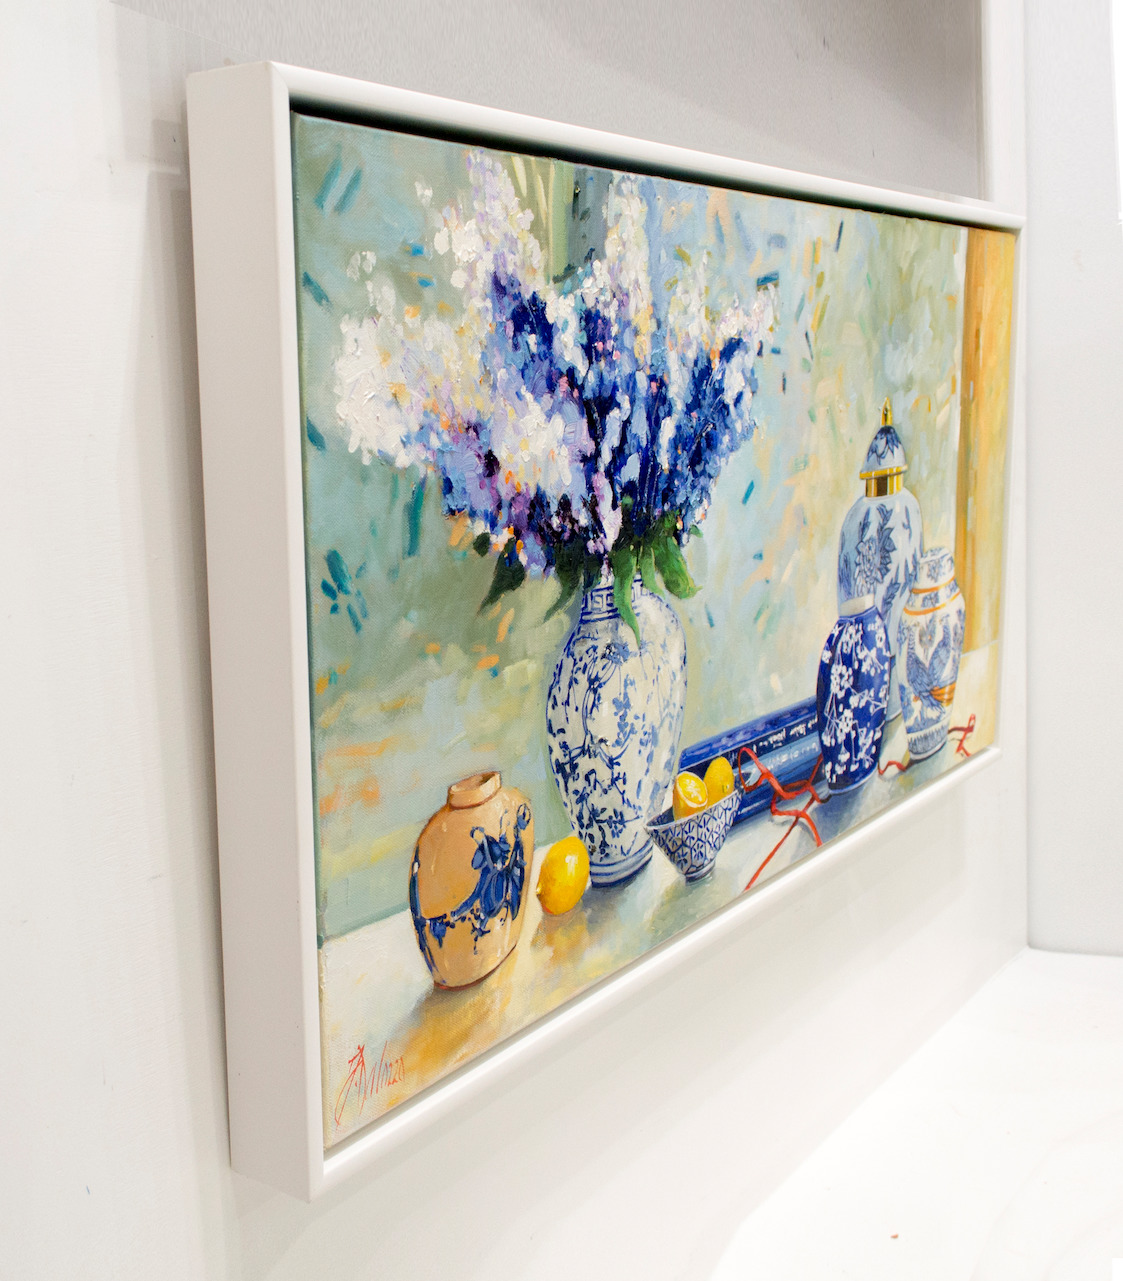 Framed Side View Of Still Life Painting "Whimsical Bouquet" By Judith Dalozzo